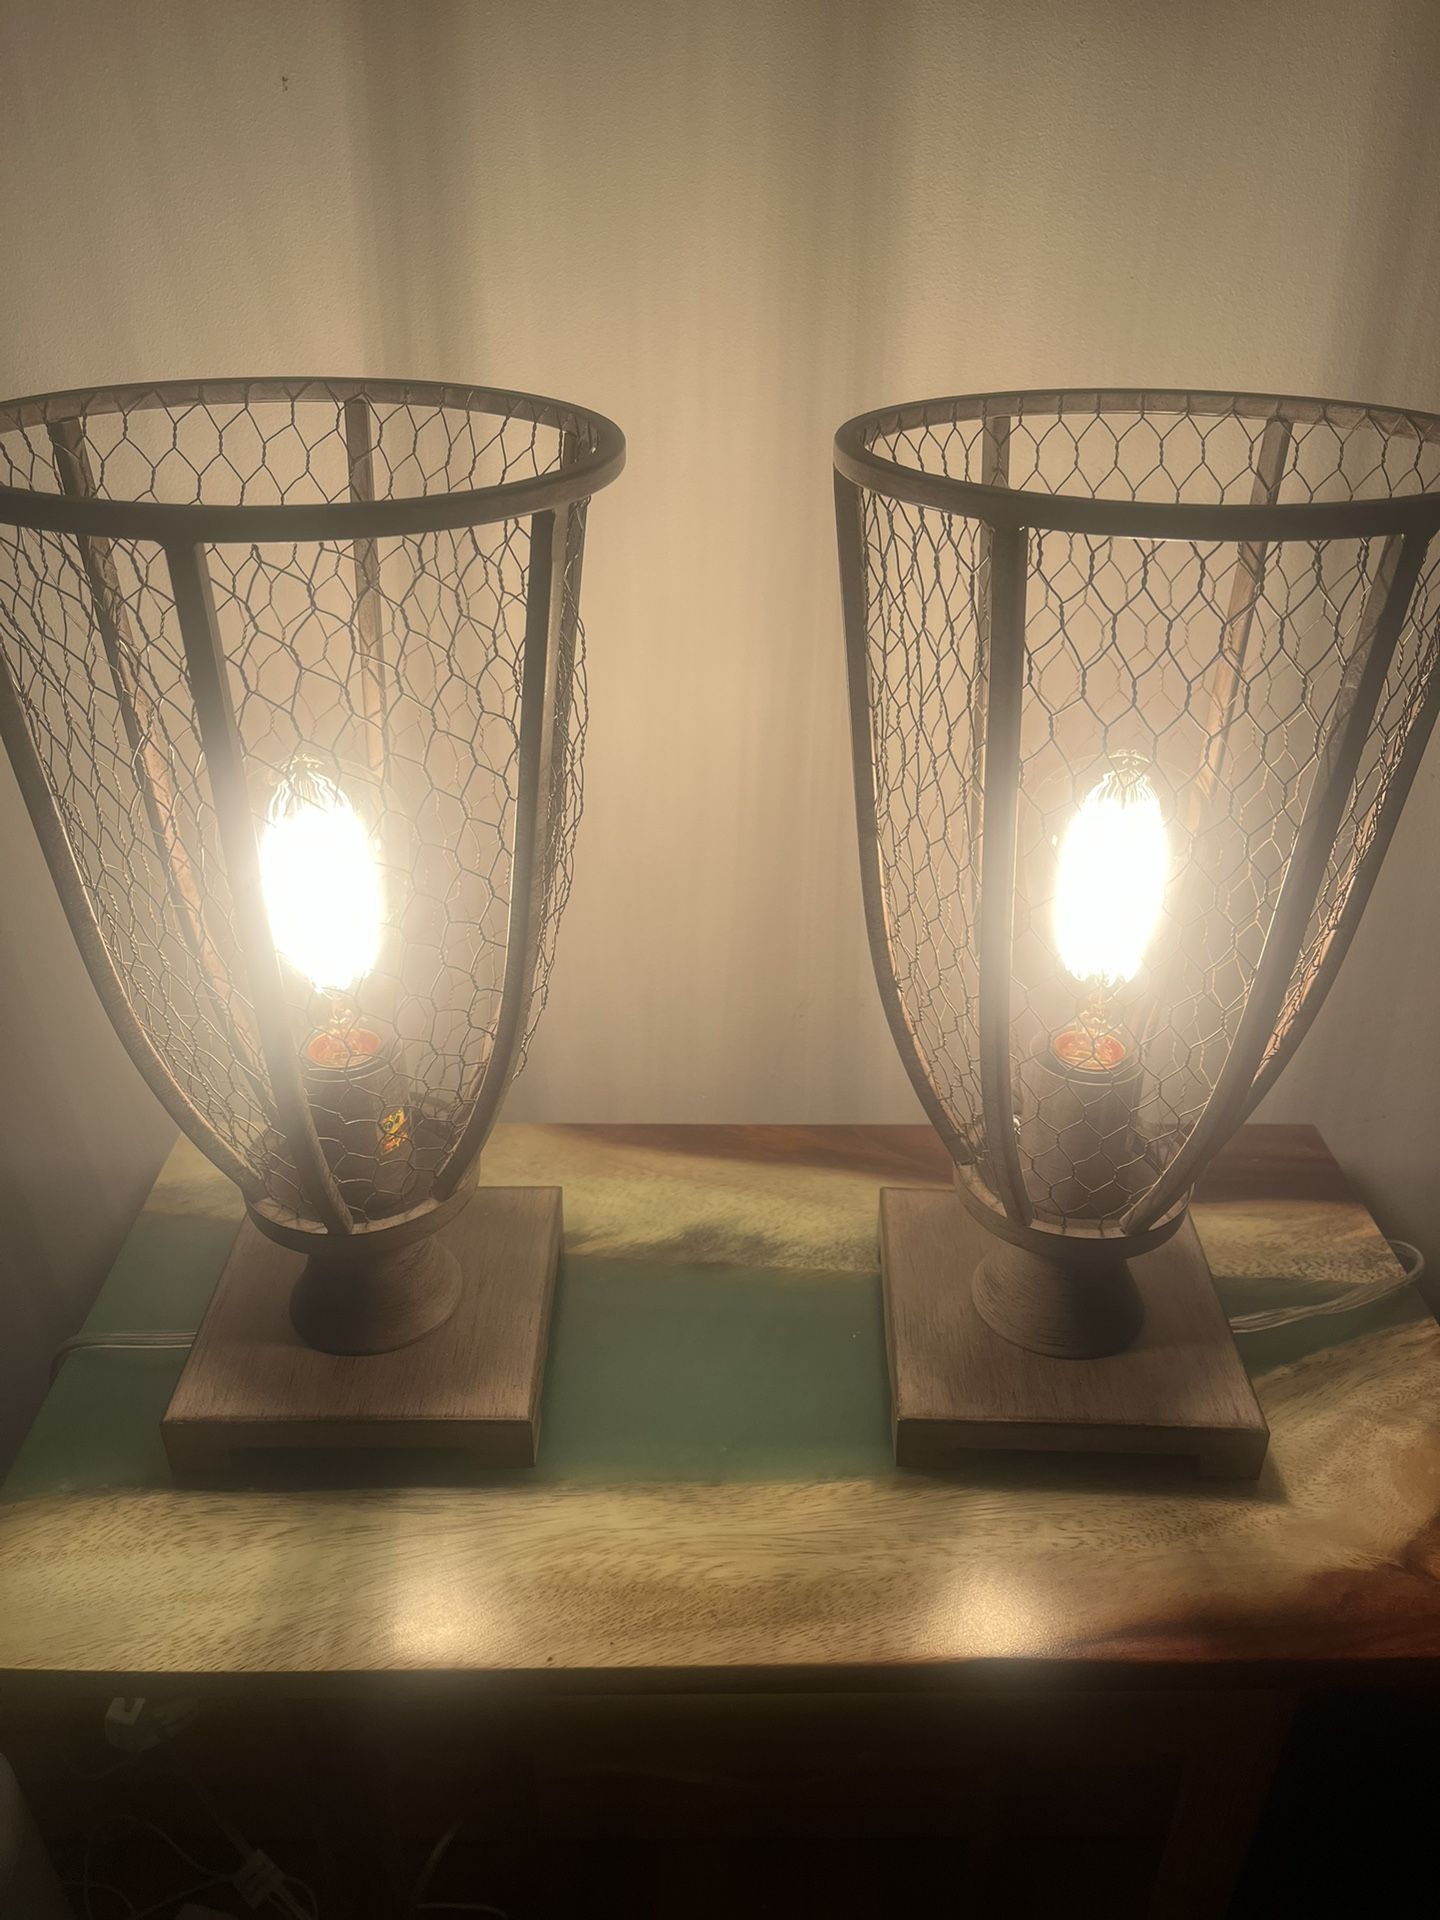 Cage lamps